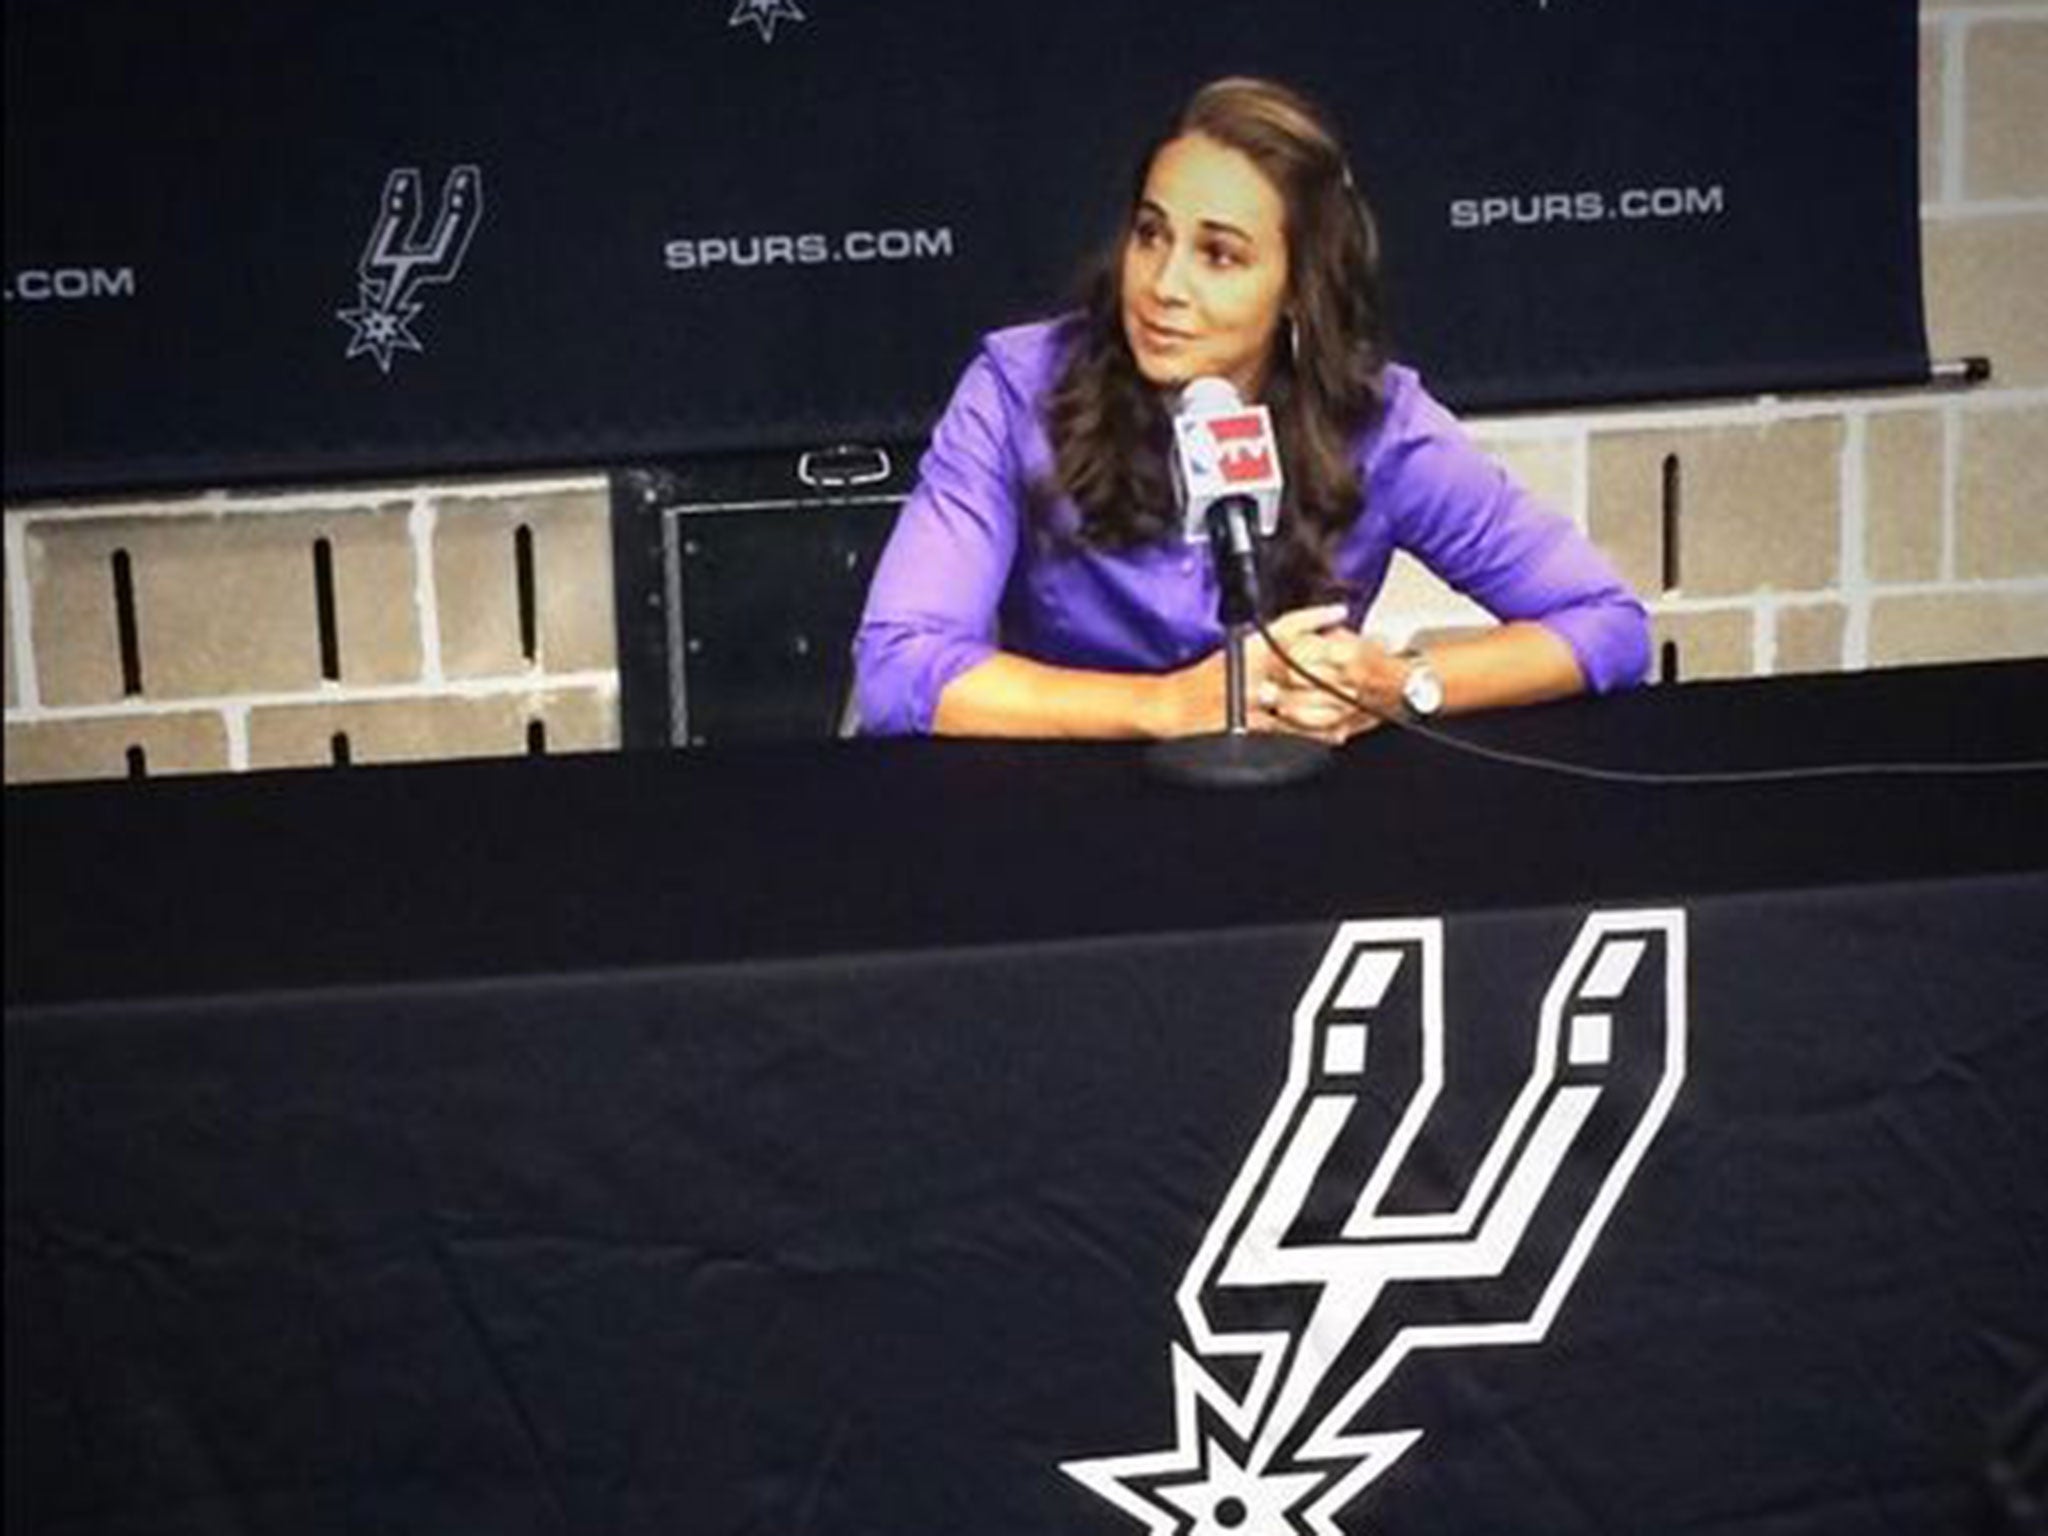 Becky Hammon has become the first full-time female coach in the NBA